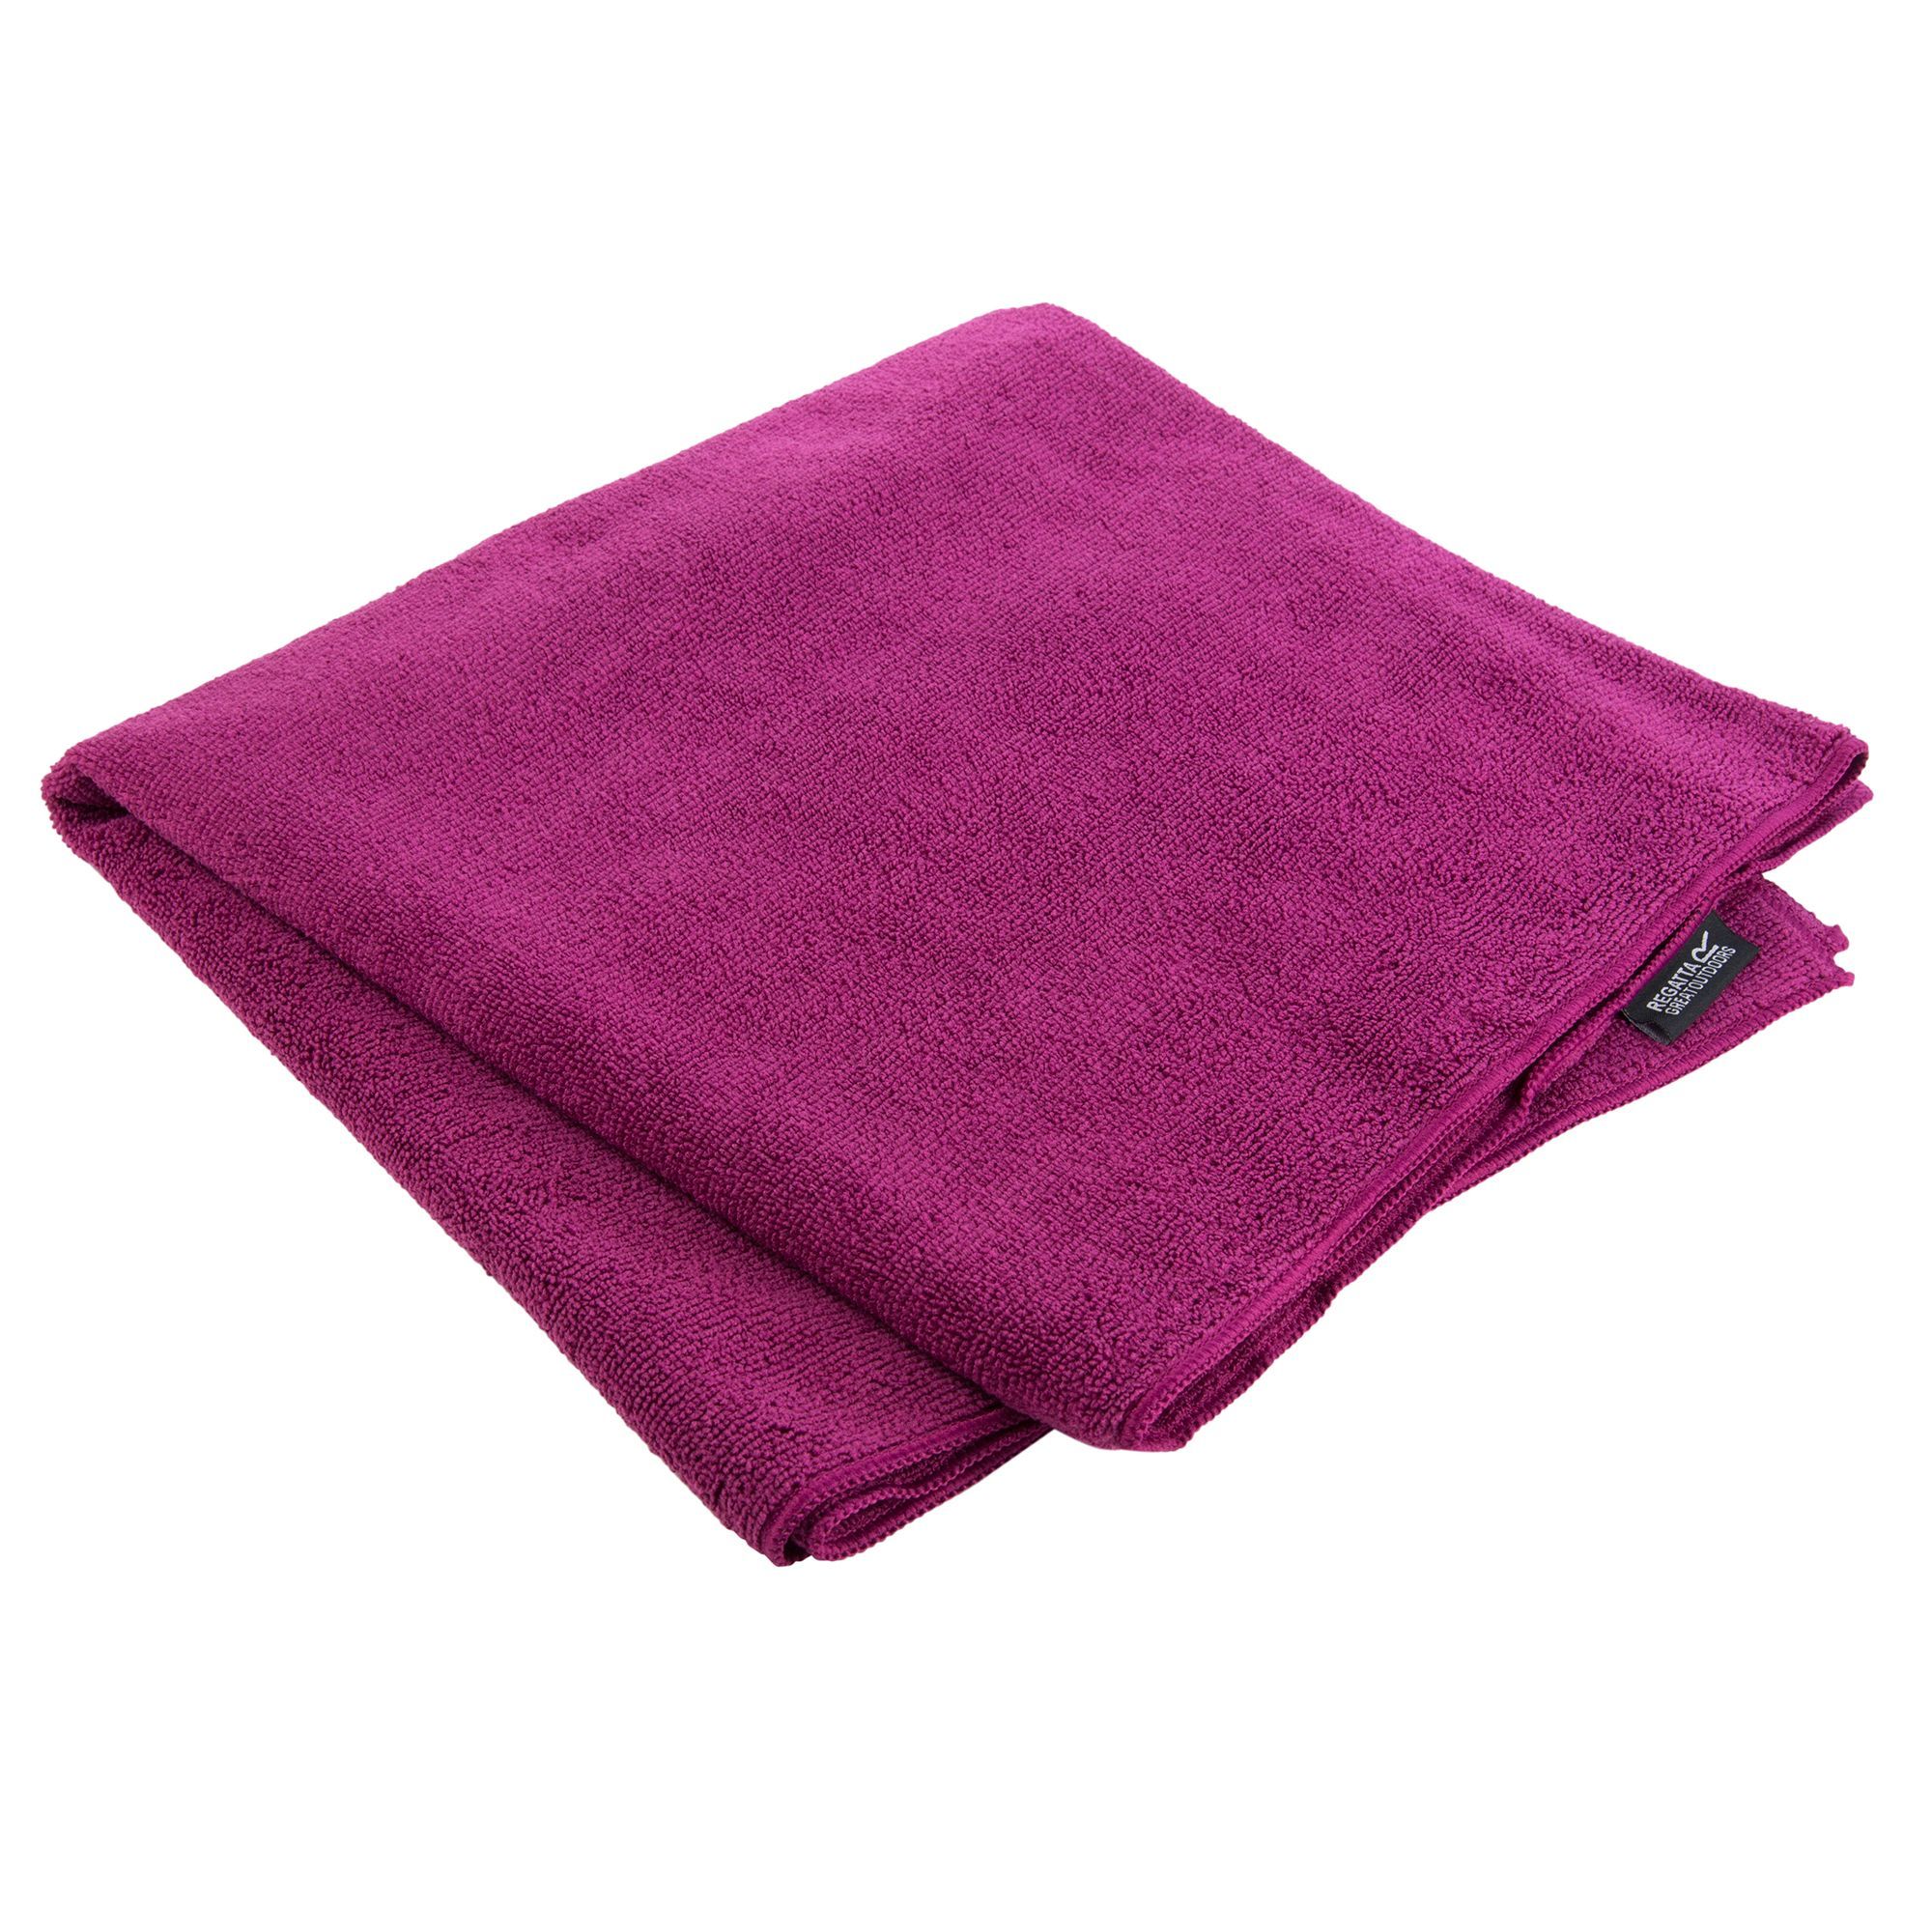 80% Polyester, 20% Polyamide. Lightweight and compact. Dries 4x quicker than a standard towel. Treated with  formula. 120 x 60cm. Includes storage bag.